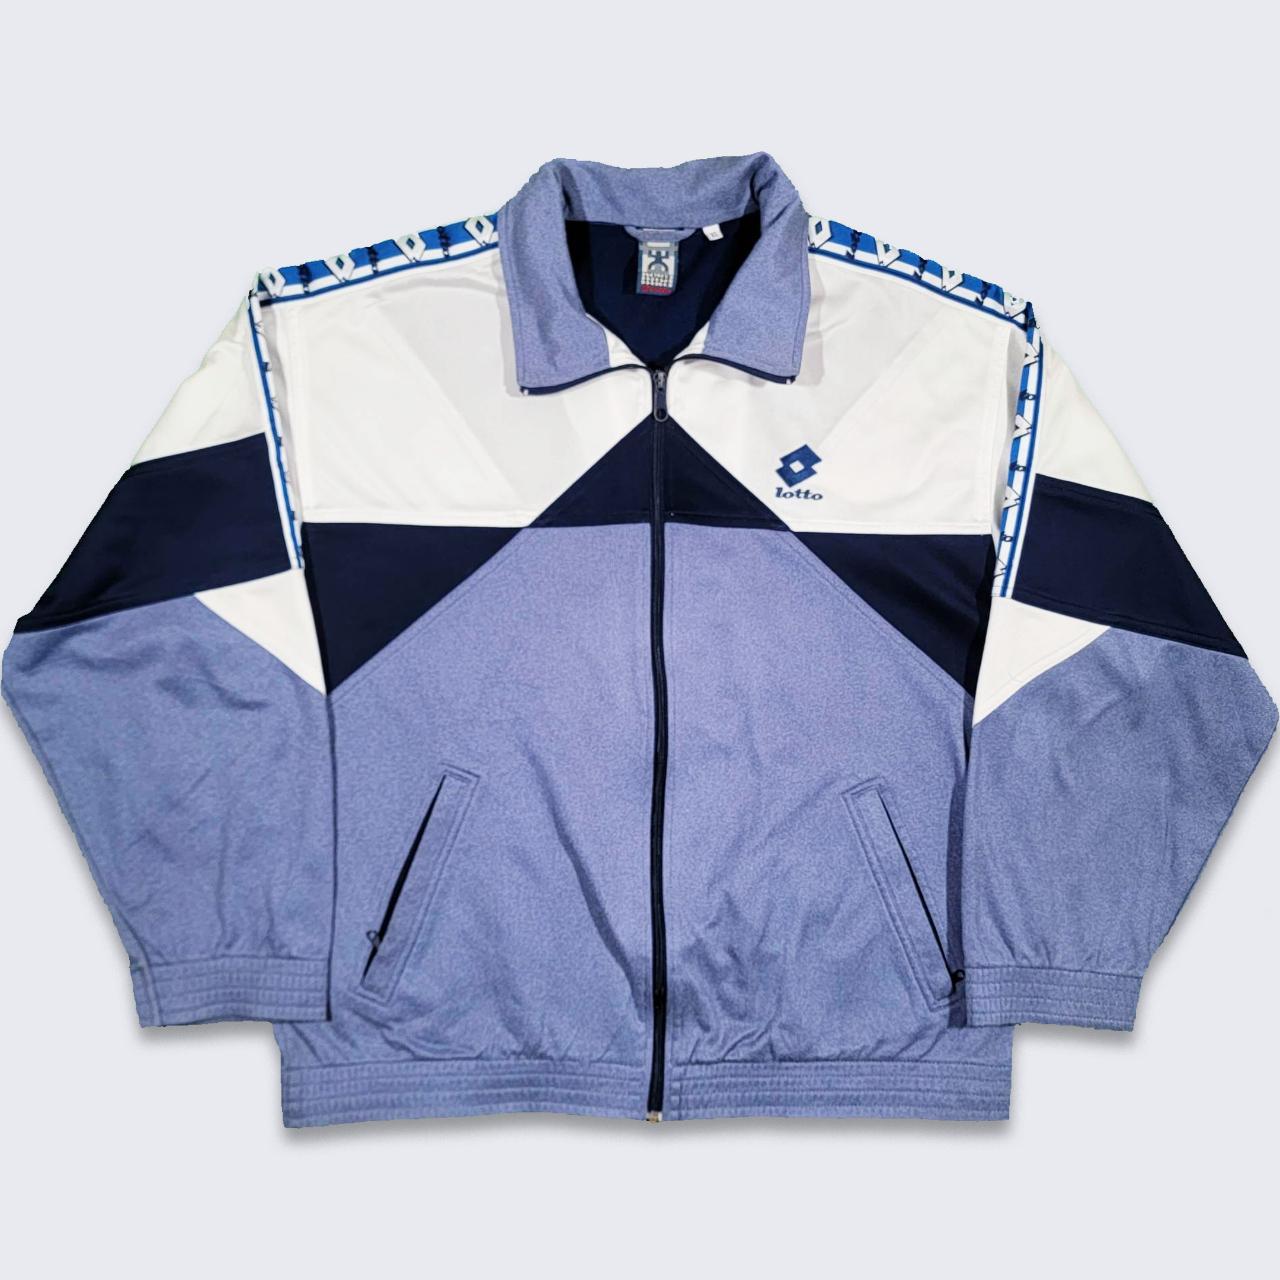 Lotto Men's Grey and Blue Jacket